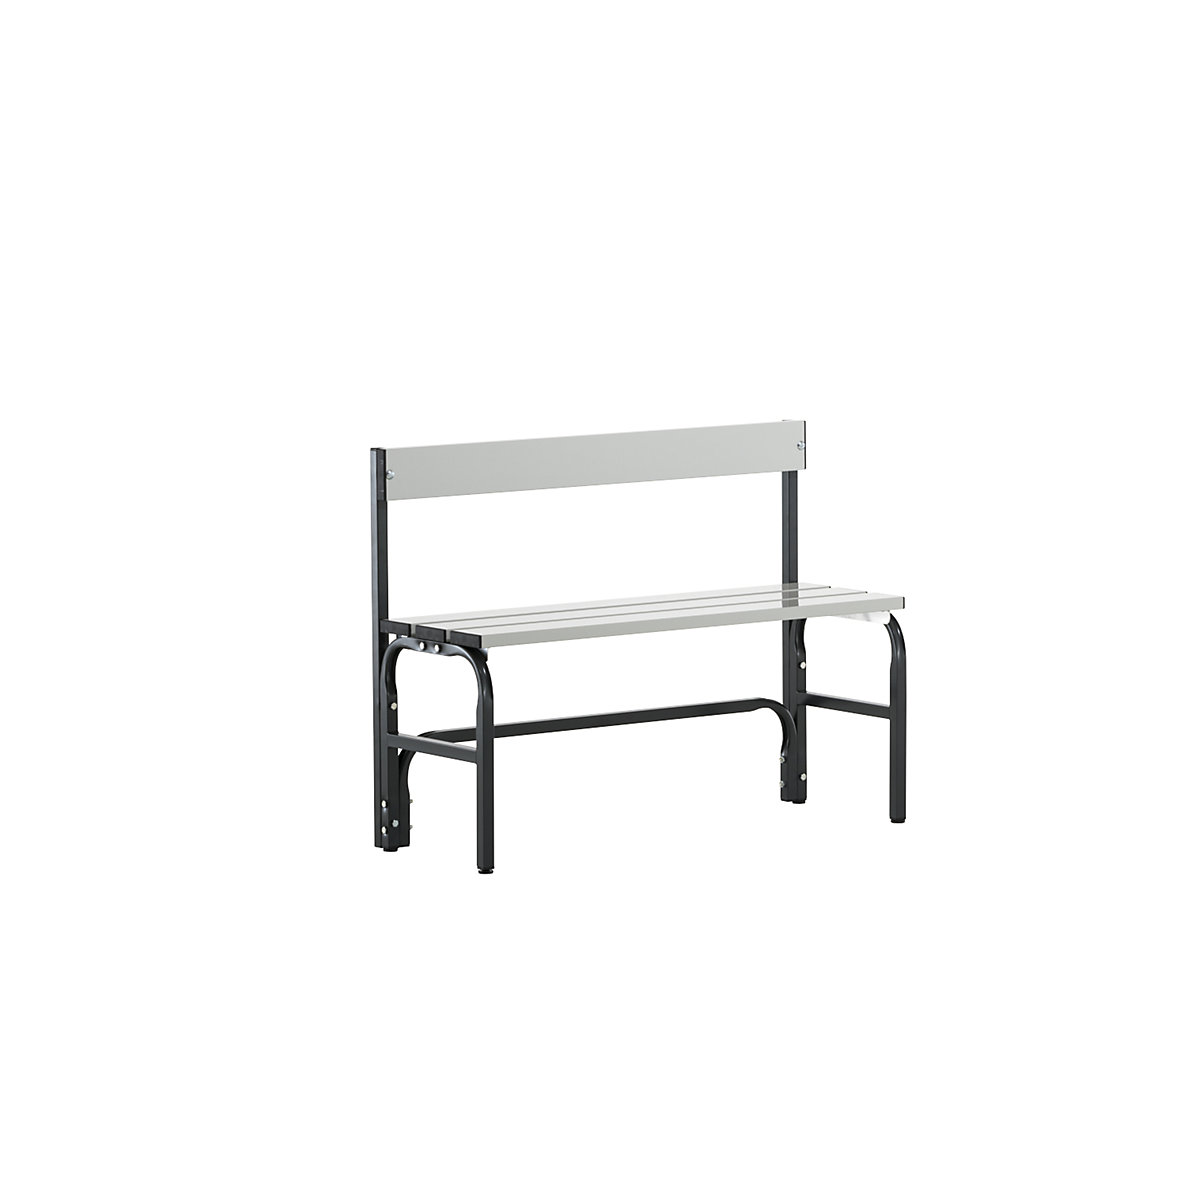 Half height cloakroom bench with back rest, single-sided - Sypro